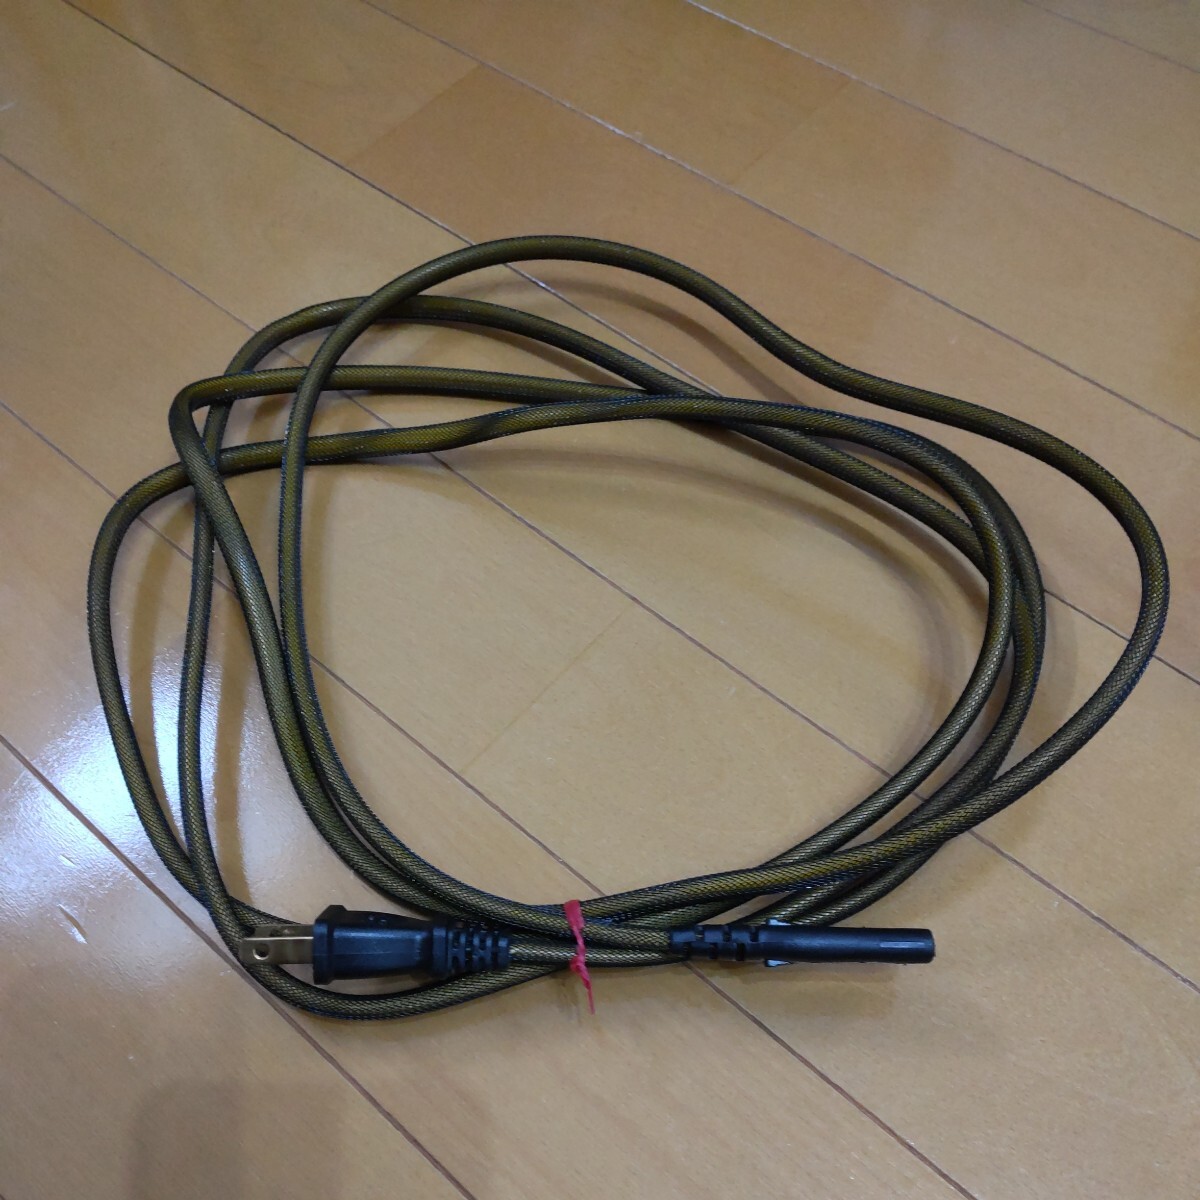 PROCABLE Pro cable both edge non plating glasses power supply cable length 3.0 meter present goods condition excellent 